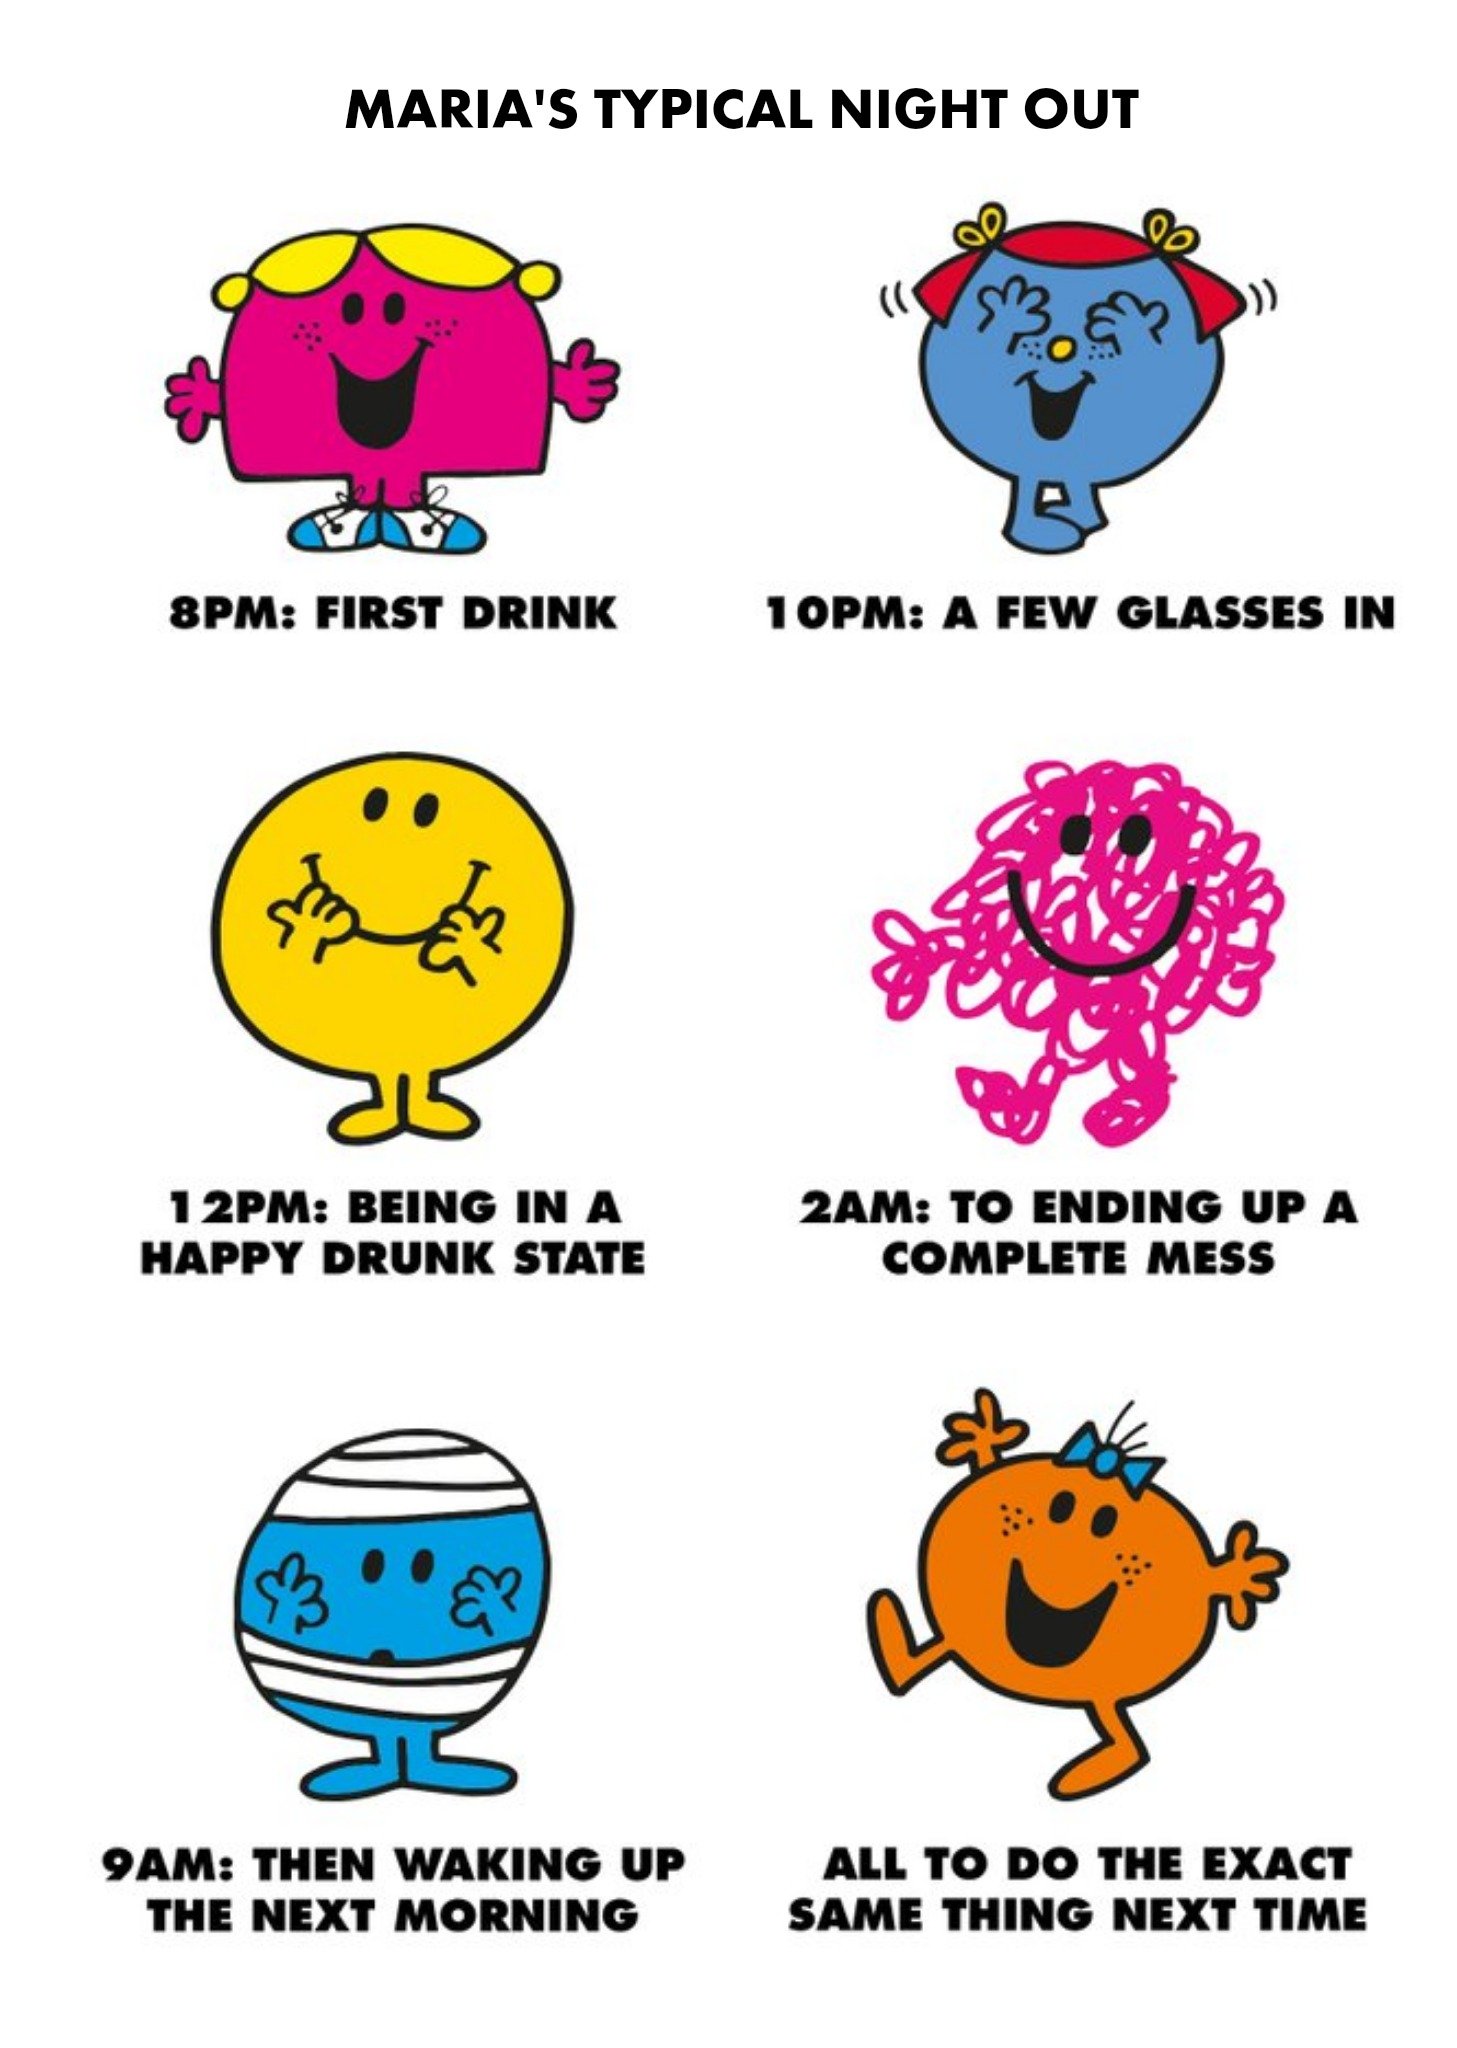 Other Birthday Card - Mr Men - Little Miss - Funny Card - Night Out, Large